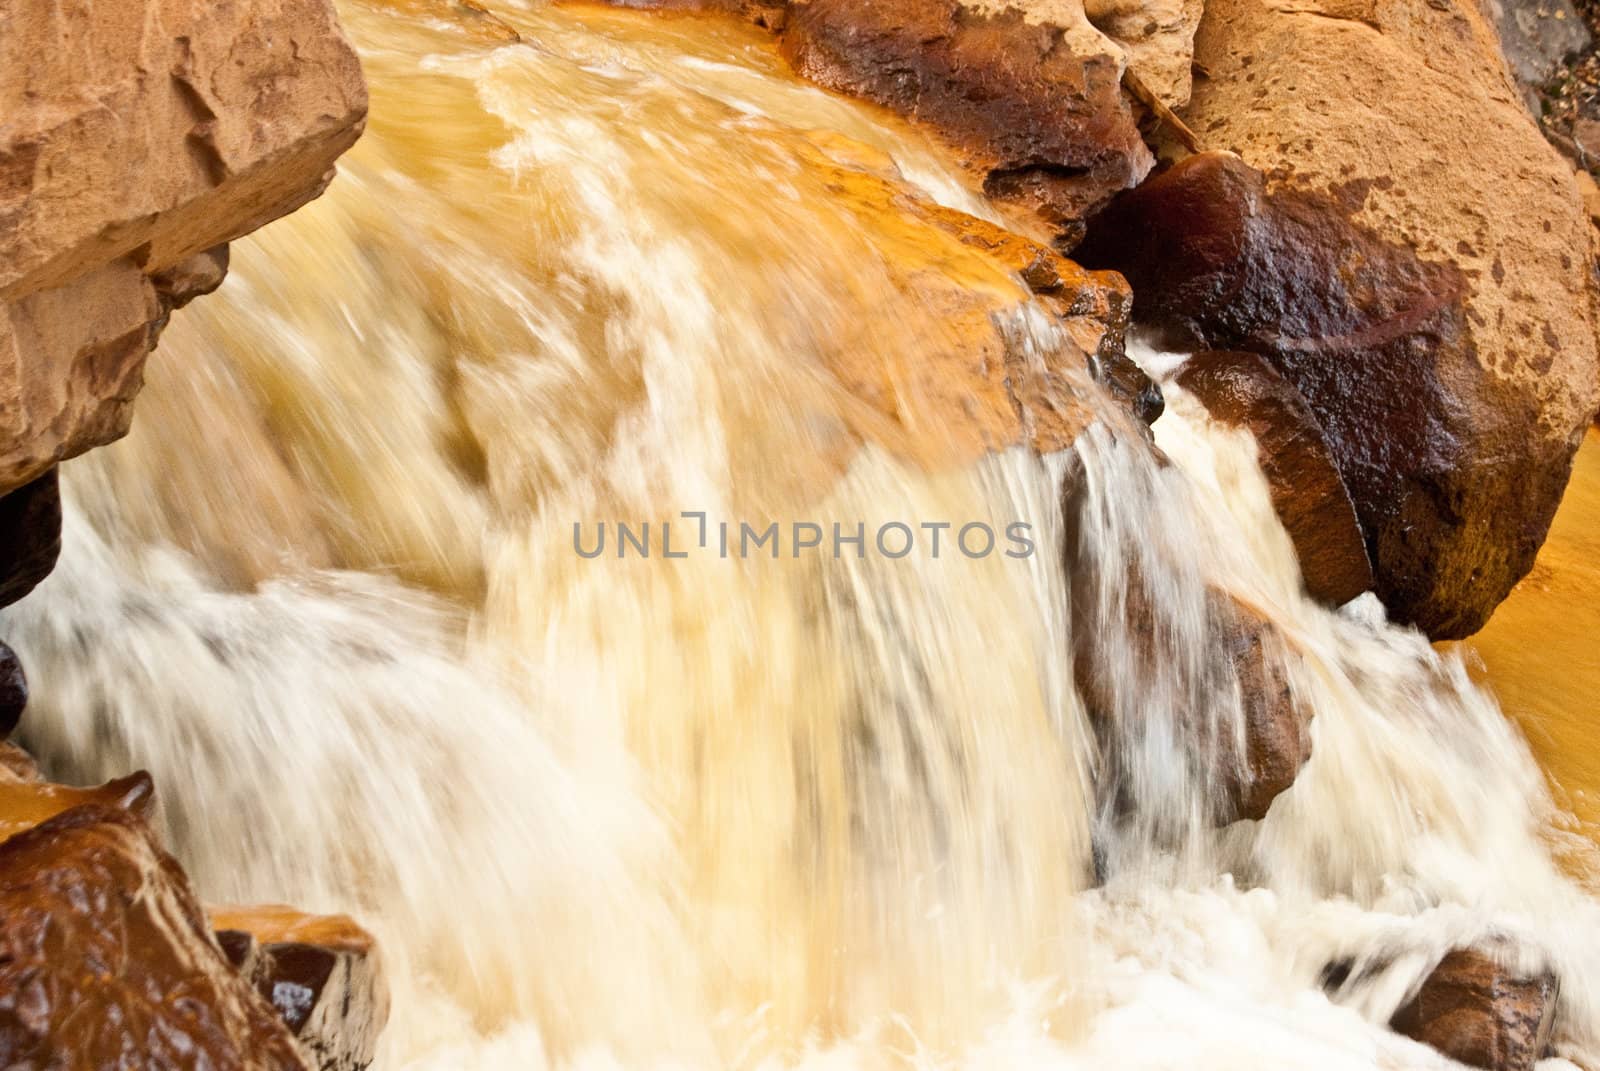 River runs yellow with sediment from gold mining in Colorado mountains near Ouray